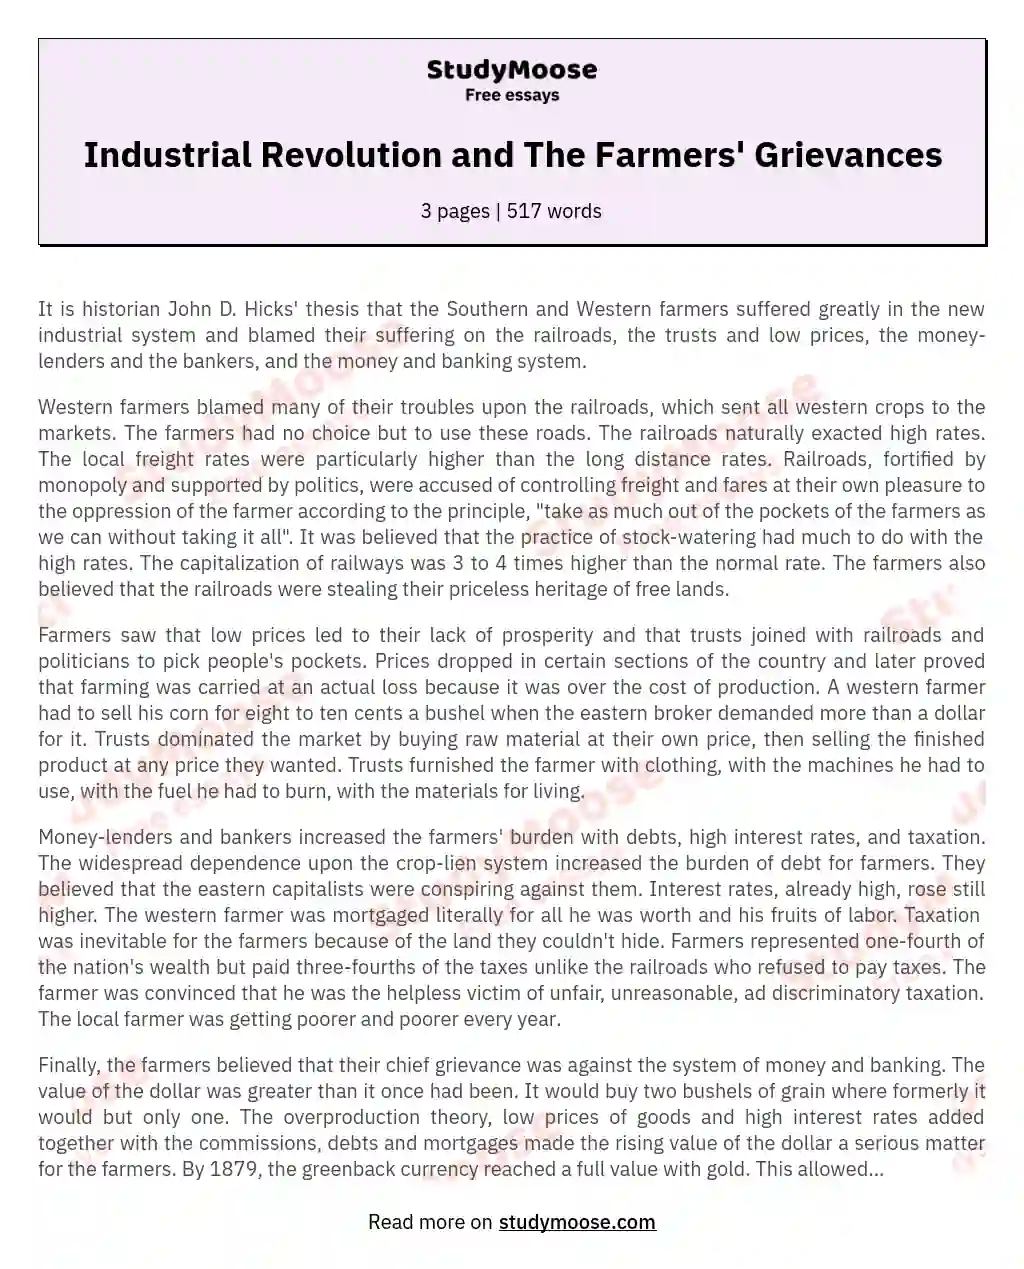 Industrial Revolution and The Farmers' Grievances essay